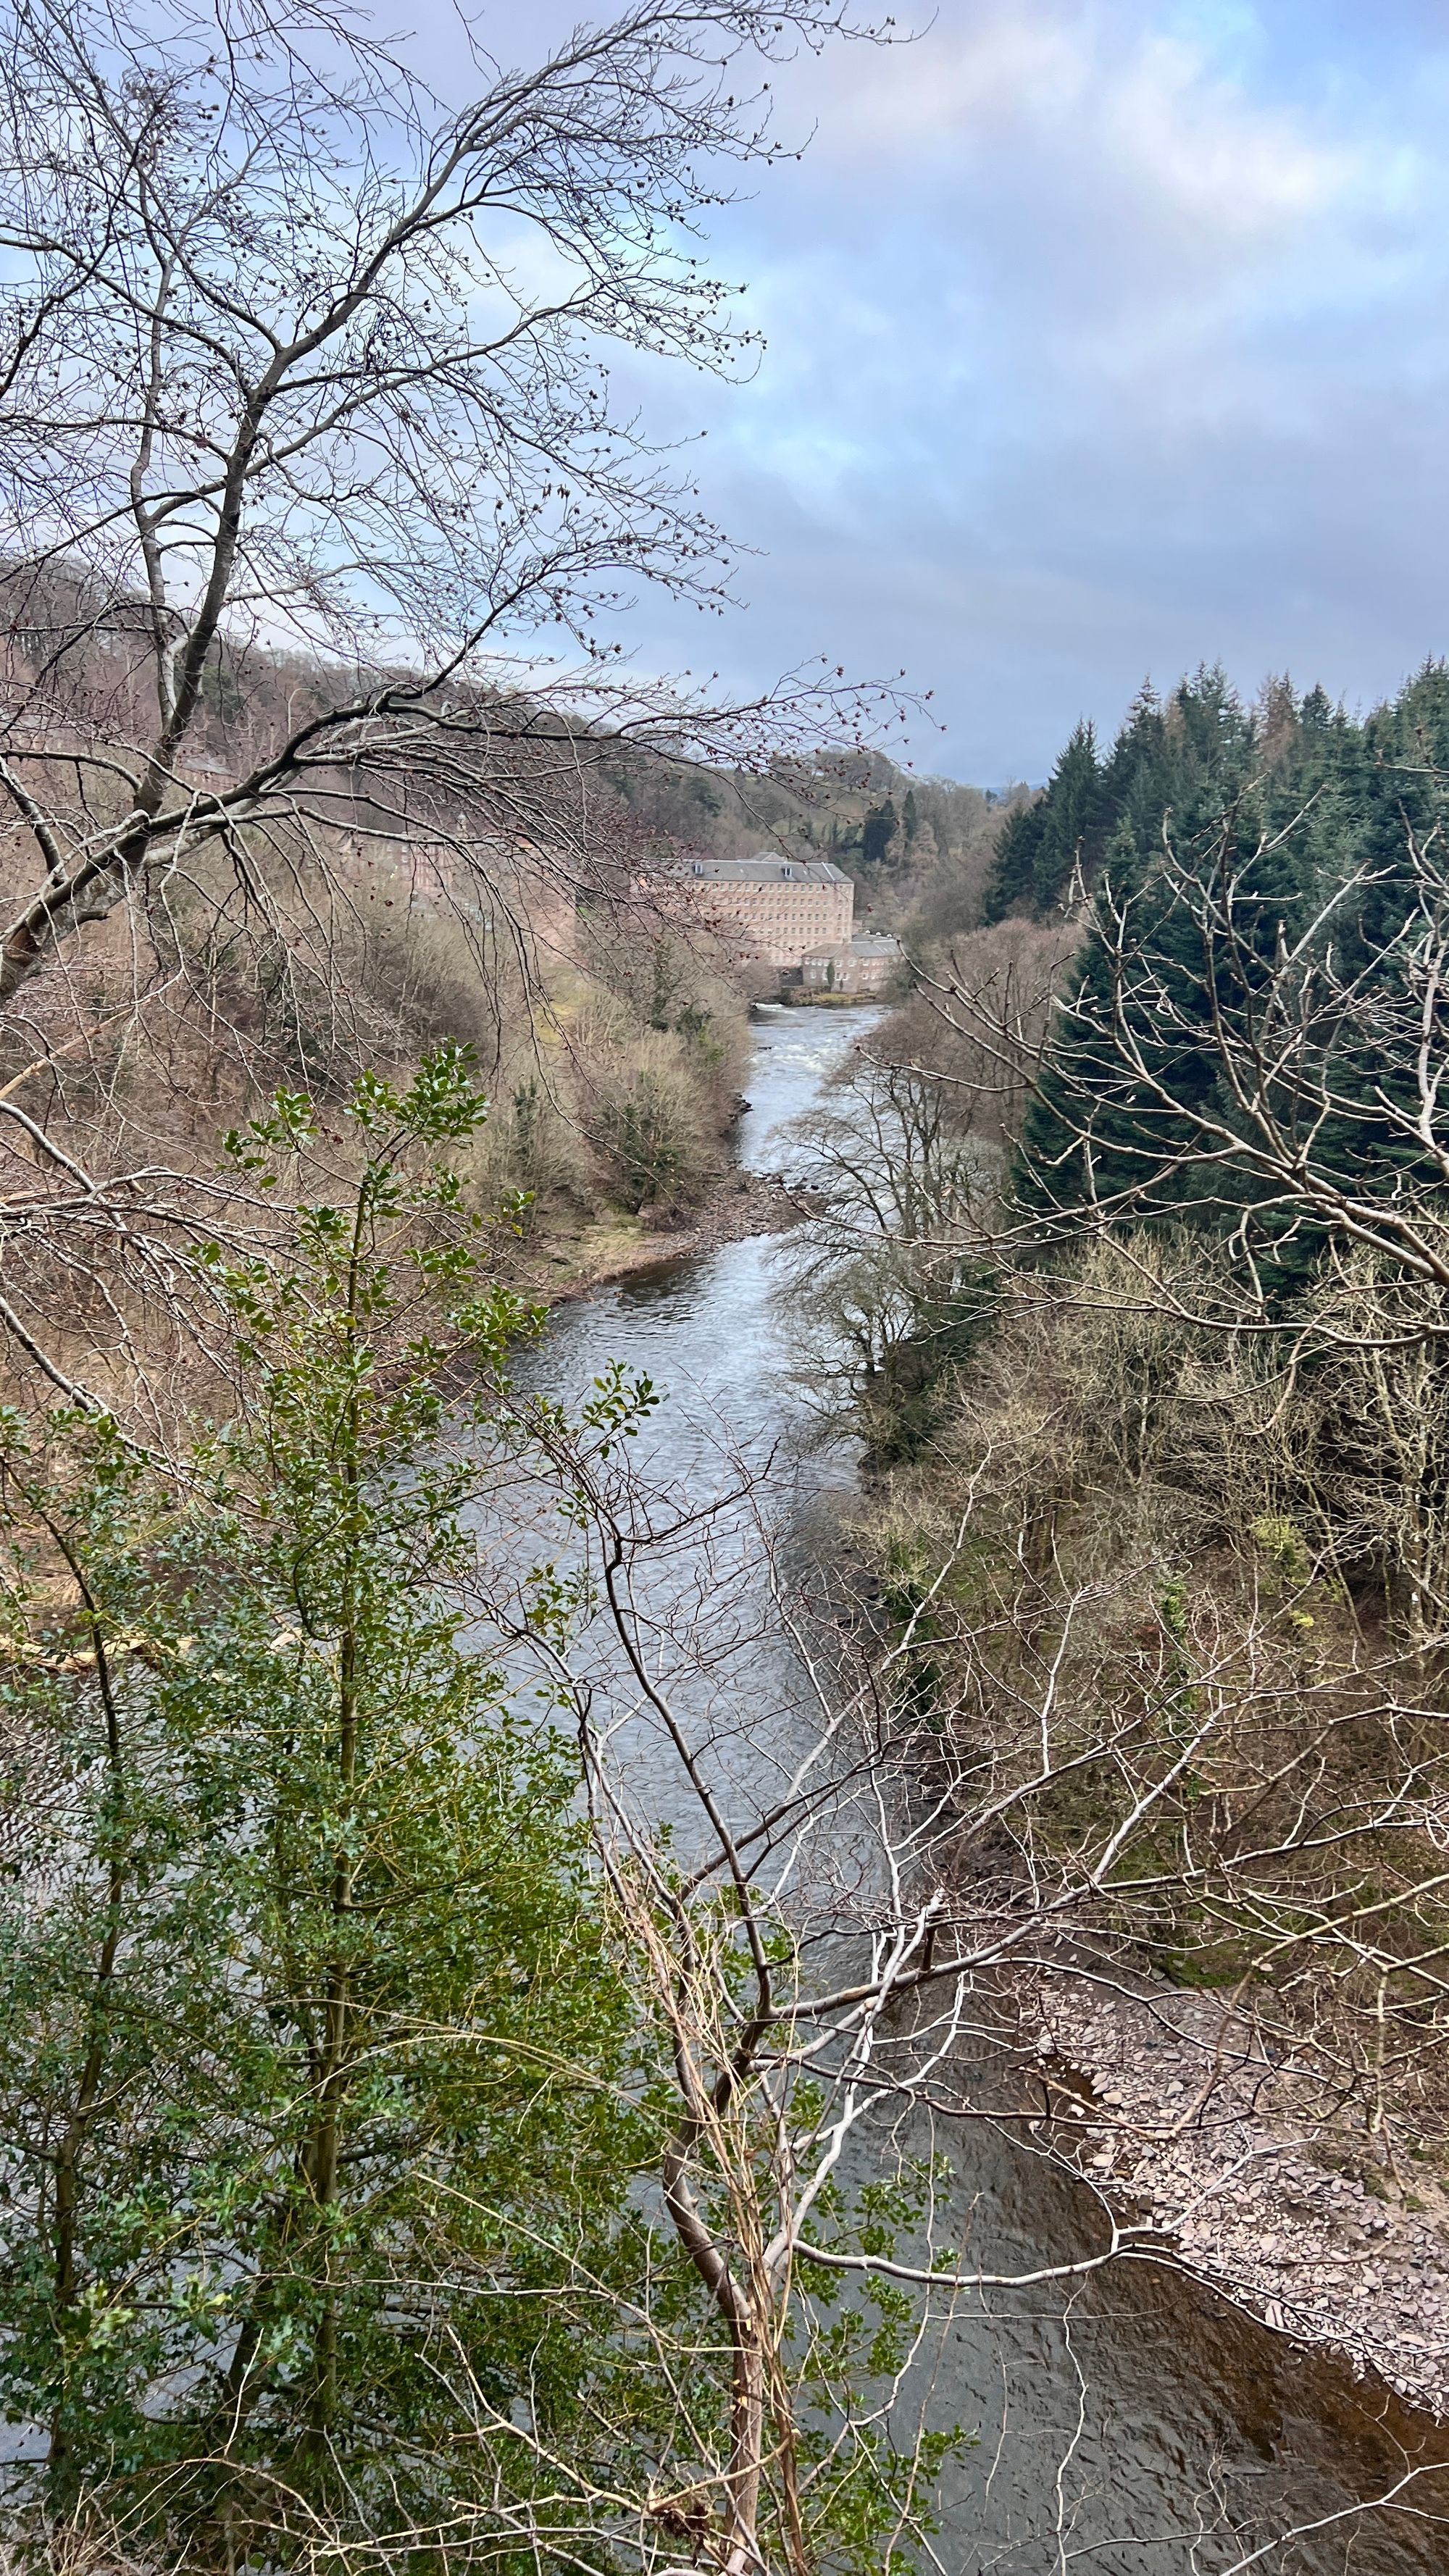 The first view of New Lanark from a viewing platform looking down the River Clyde 